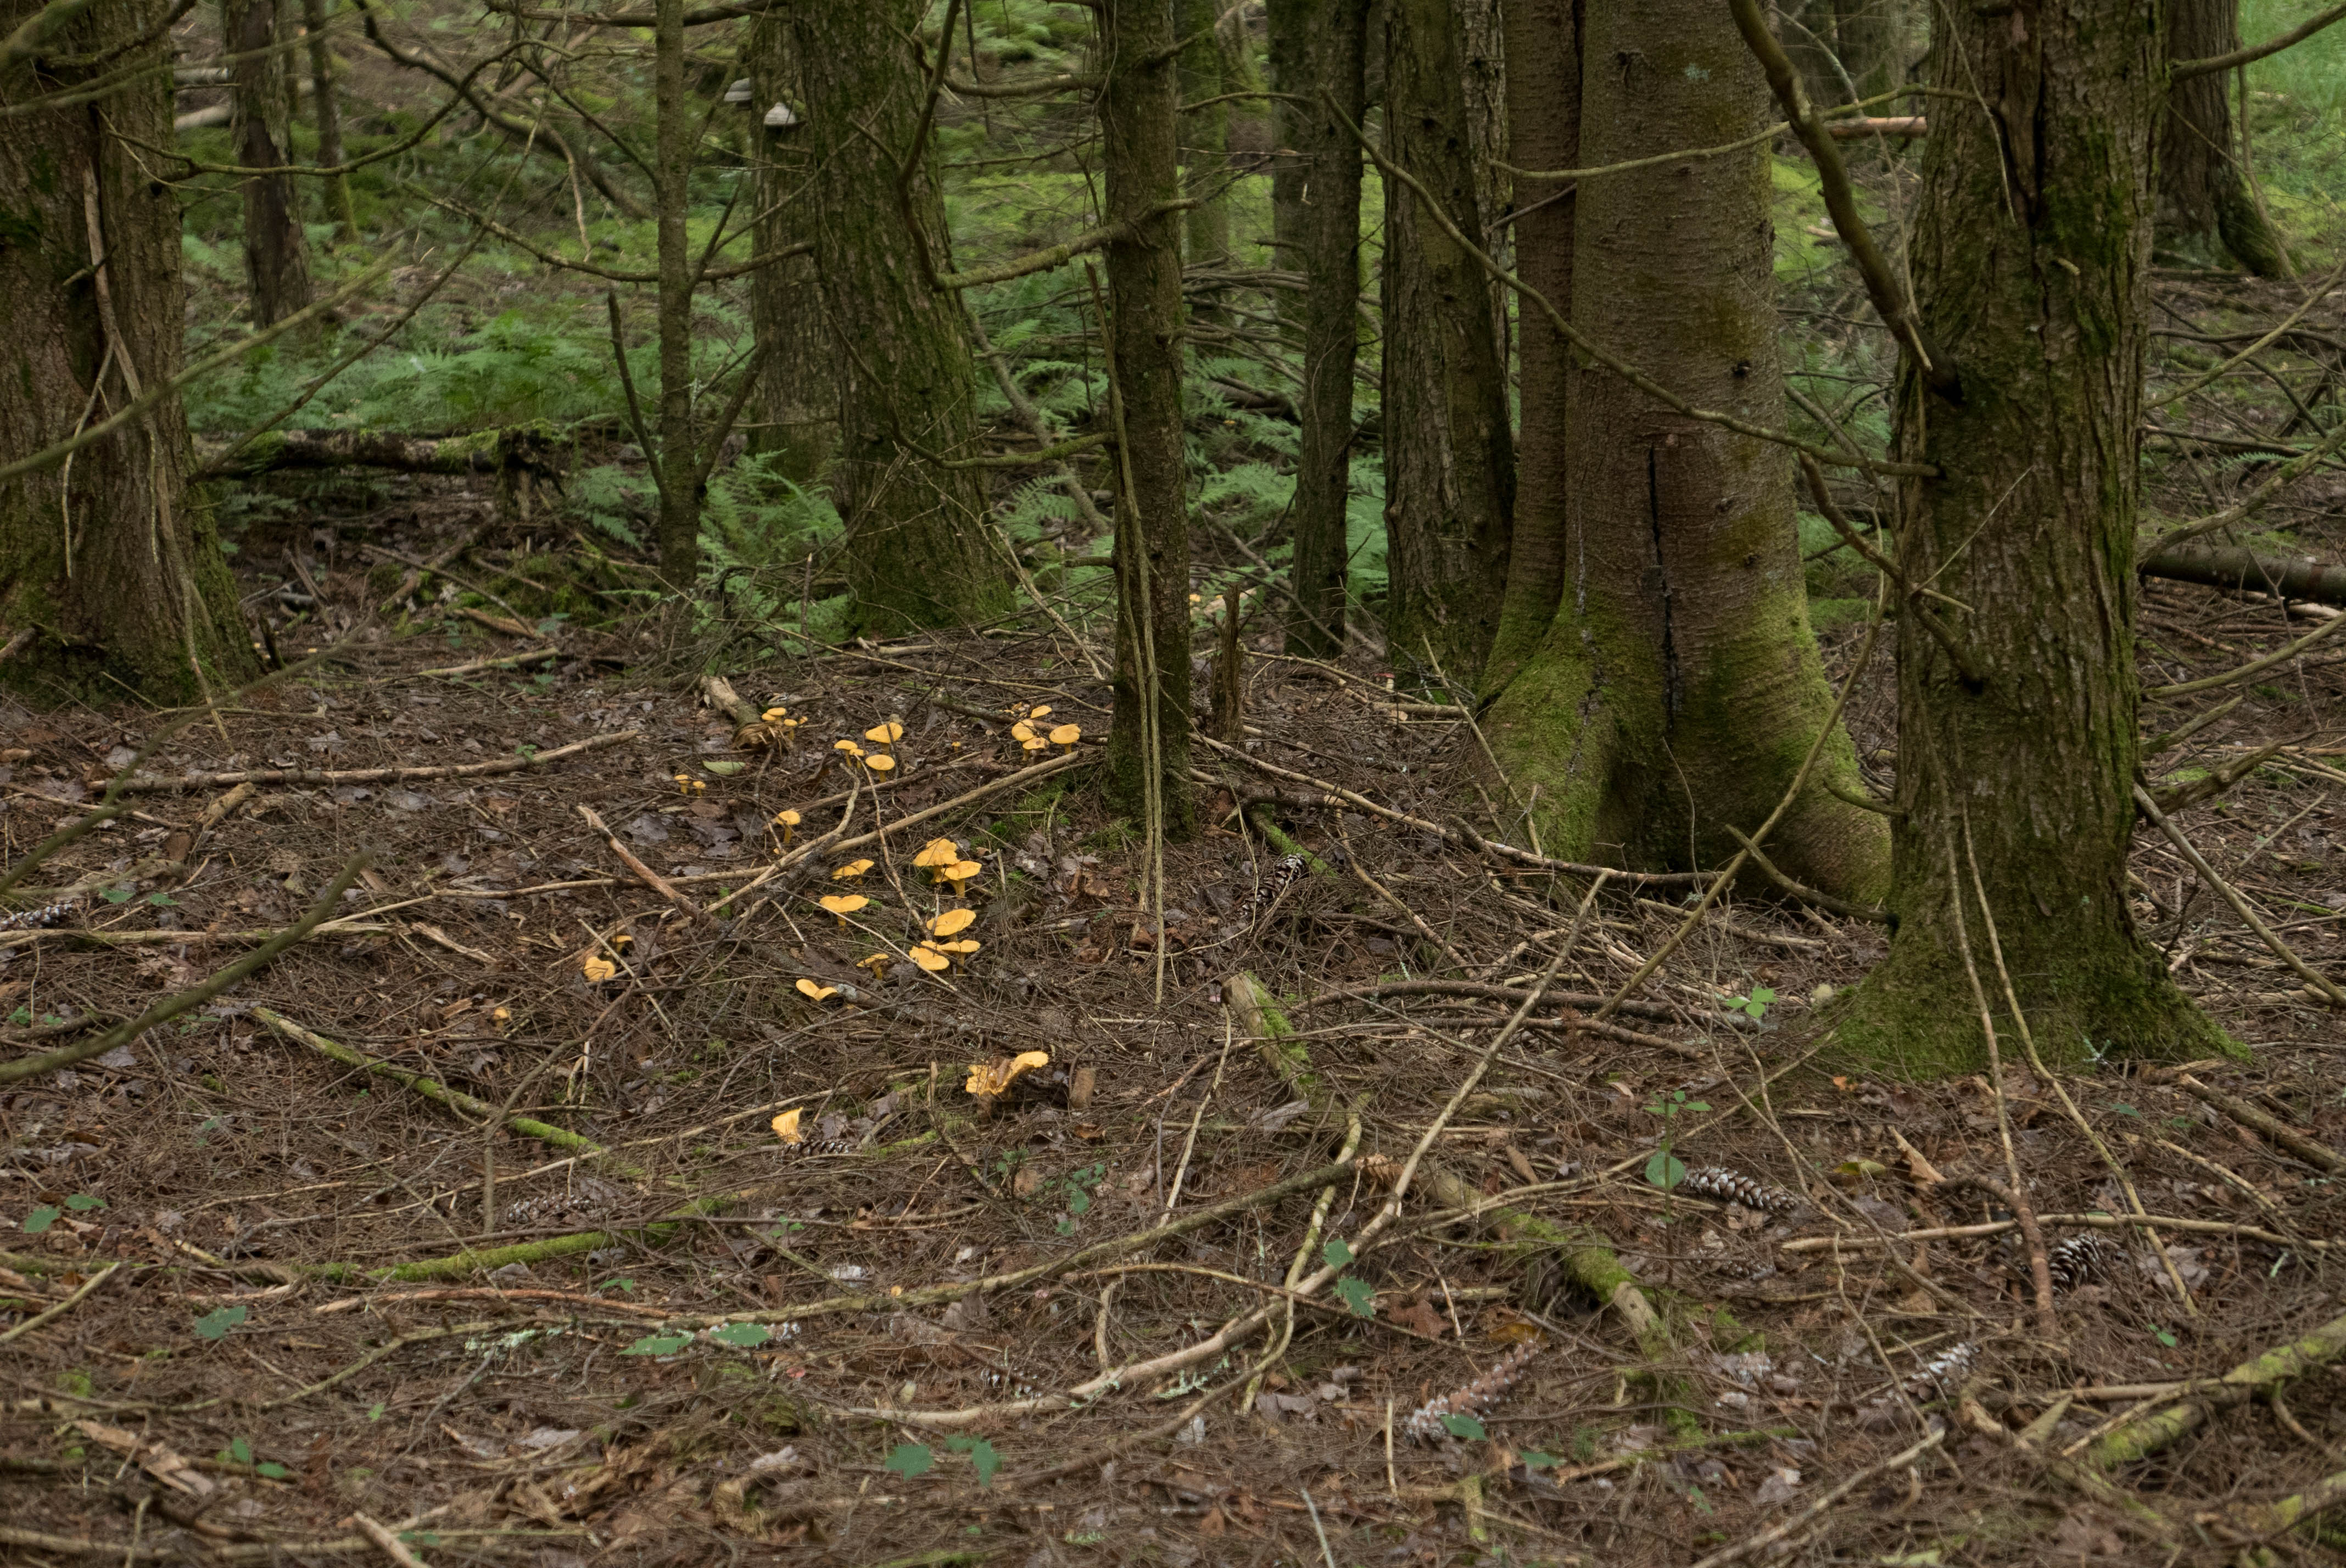 The woods are full of chanterelles this year. And they are later than usual.